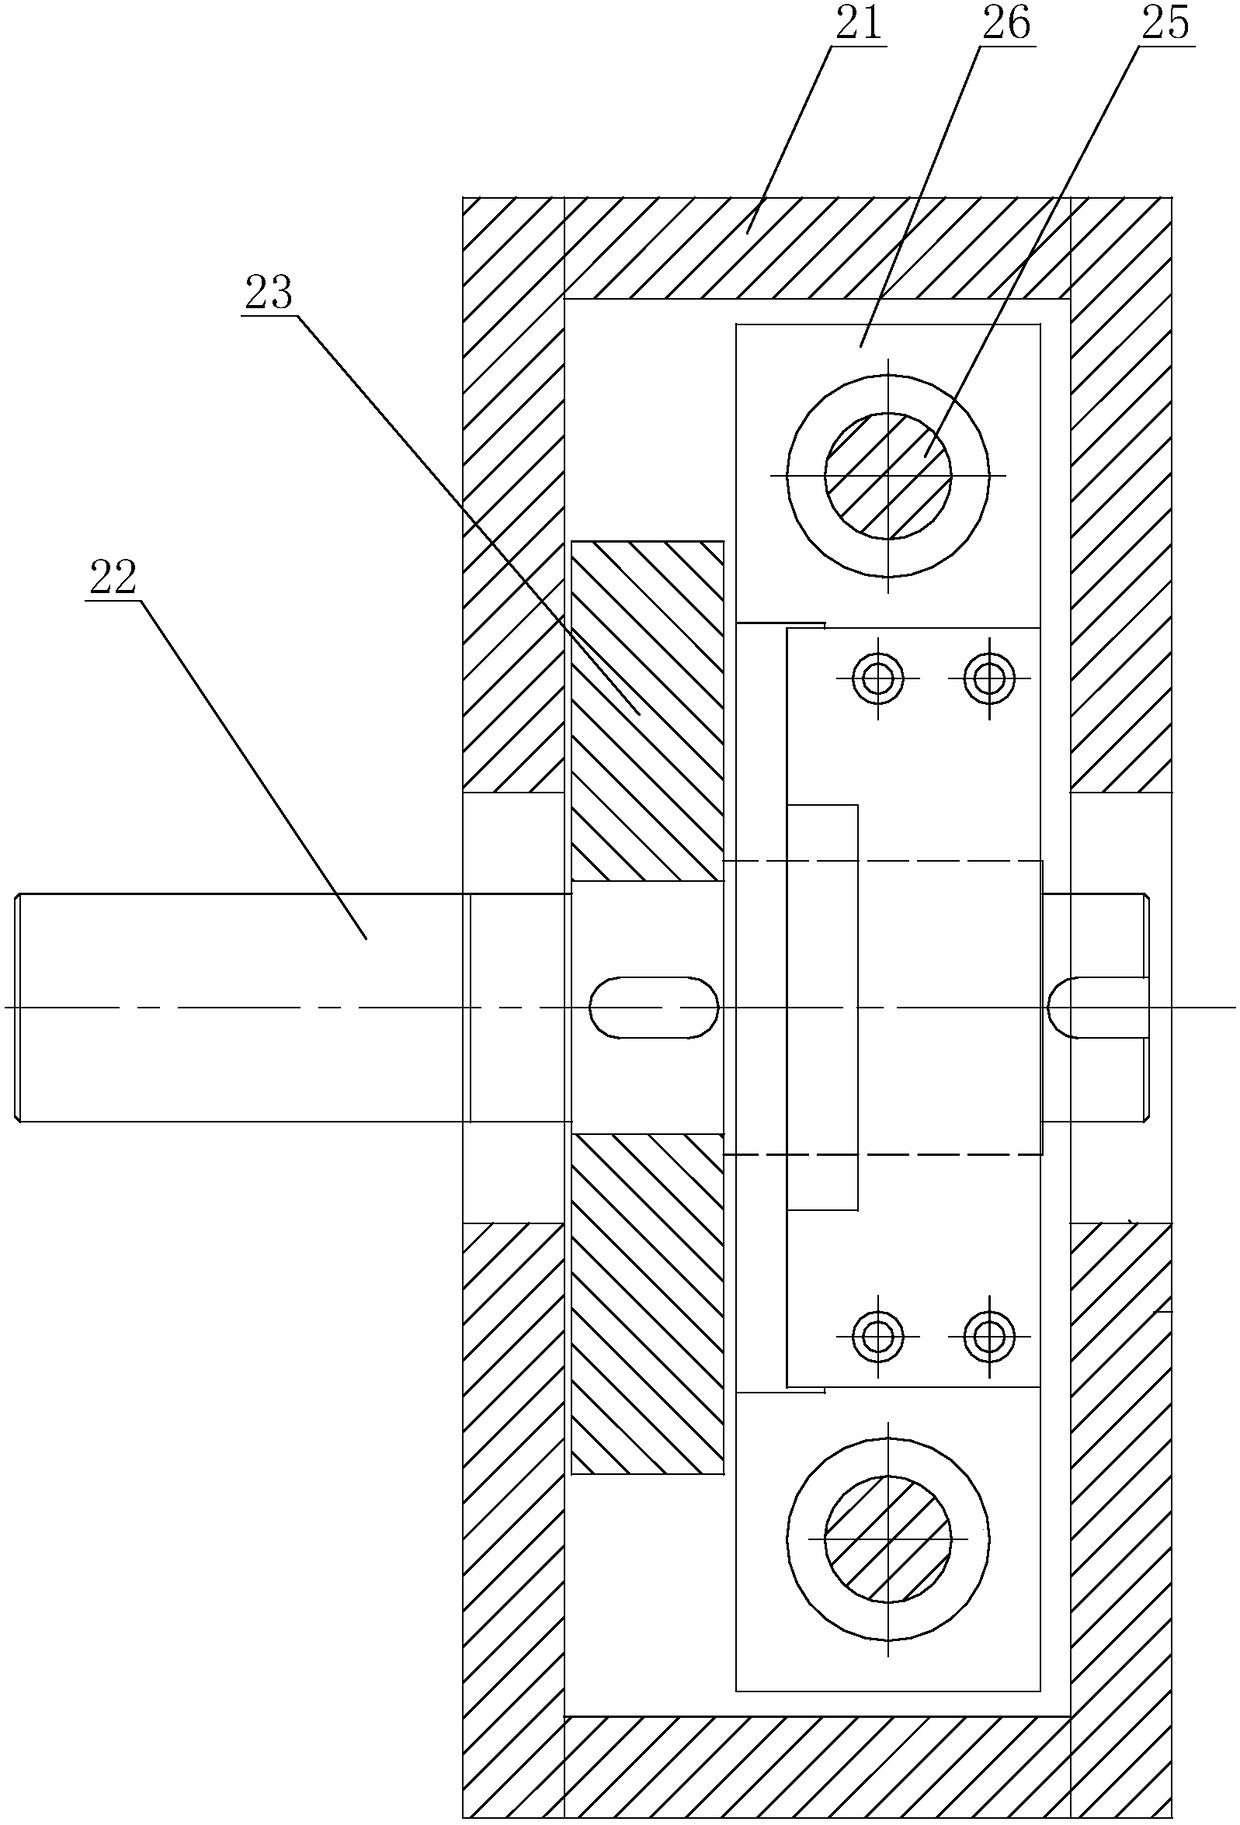 Cam box structure of material transferring mechanism for battery shell stamping